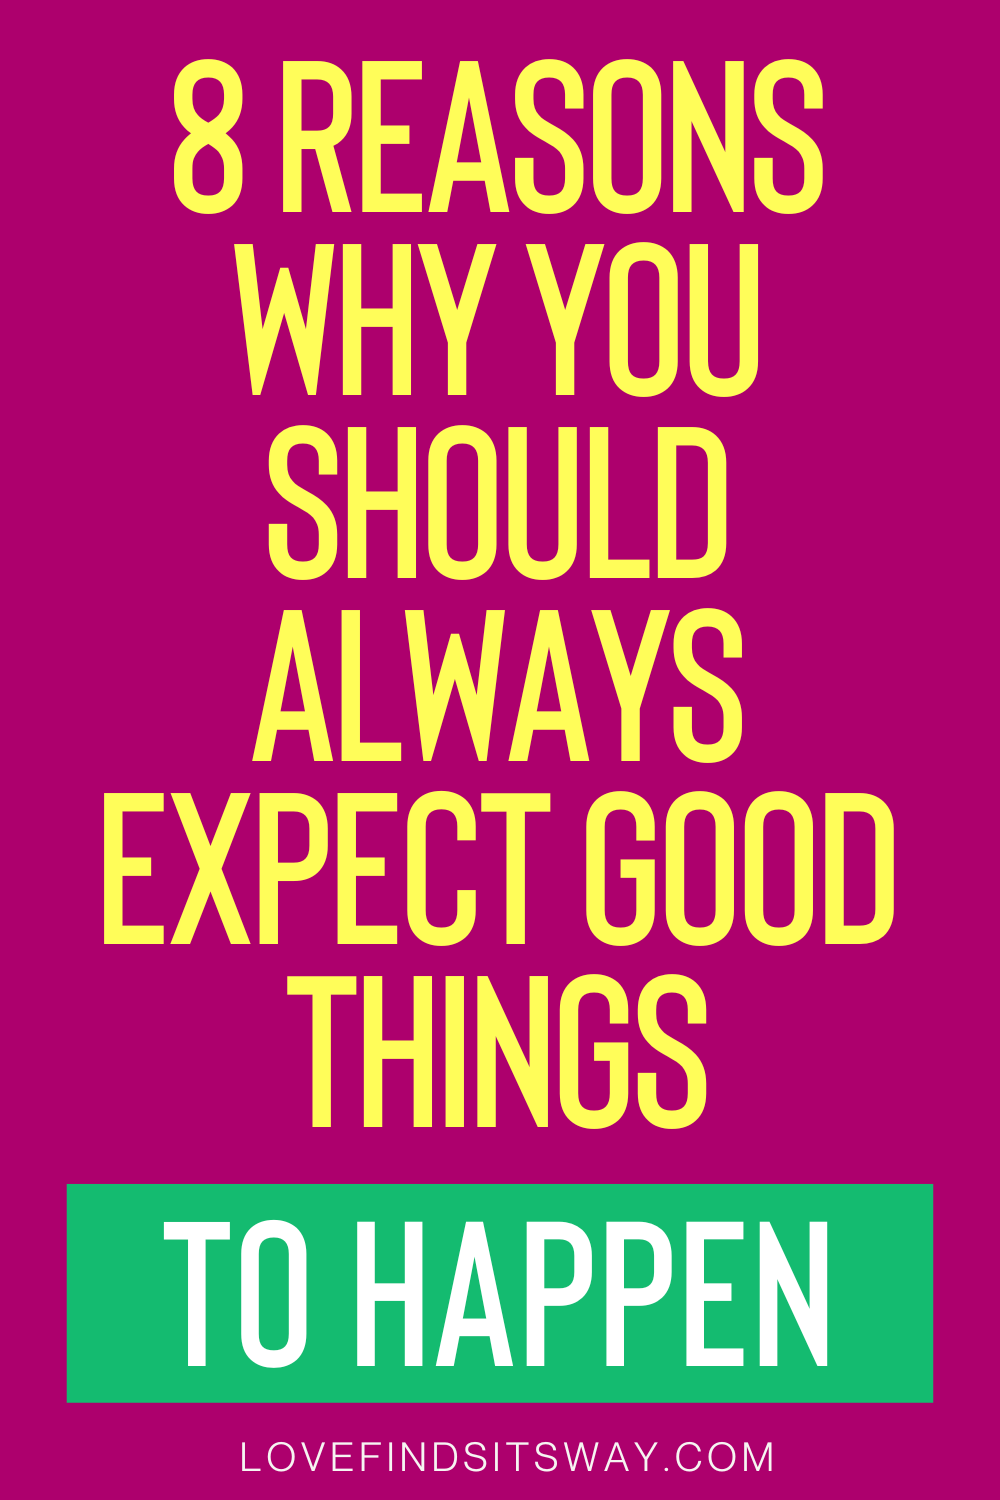 8-Reasons-Why-You-Should-Always-Expect-Good-Things-To-Happen